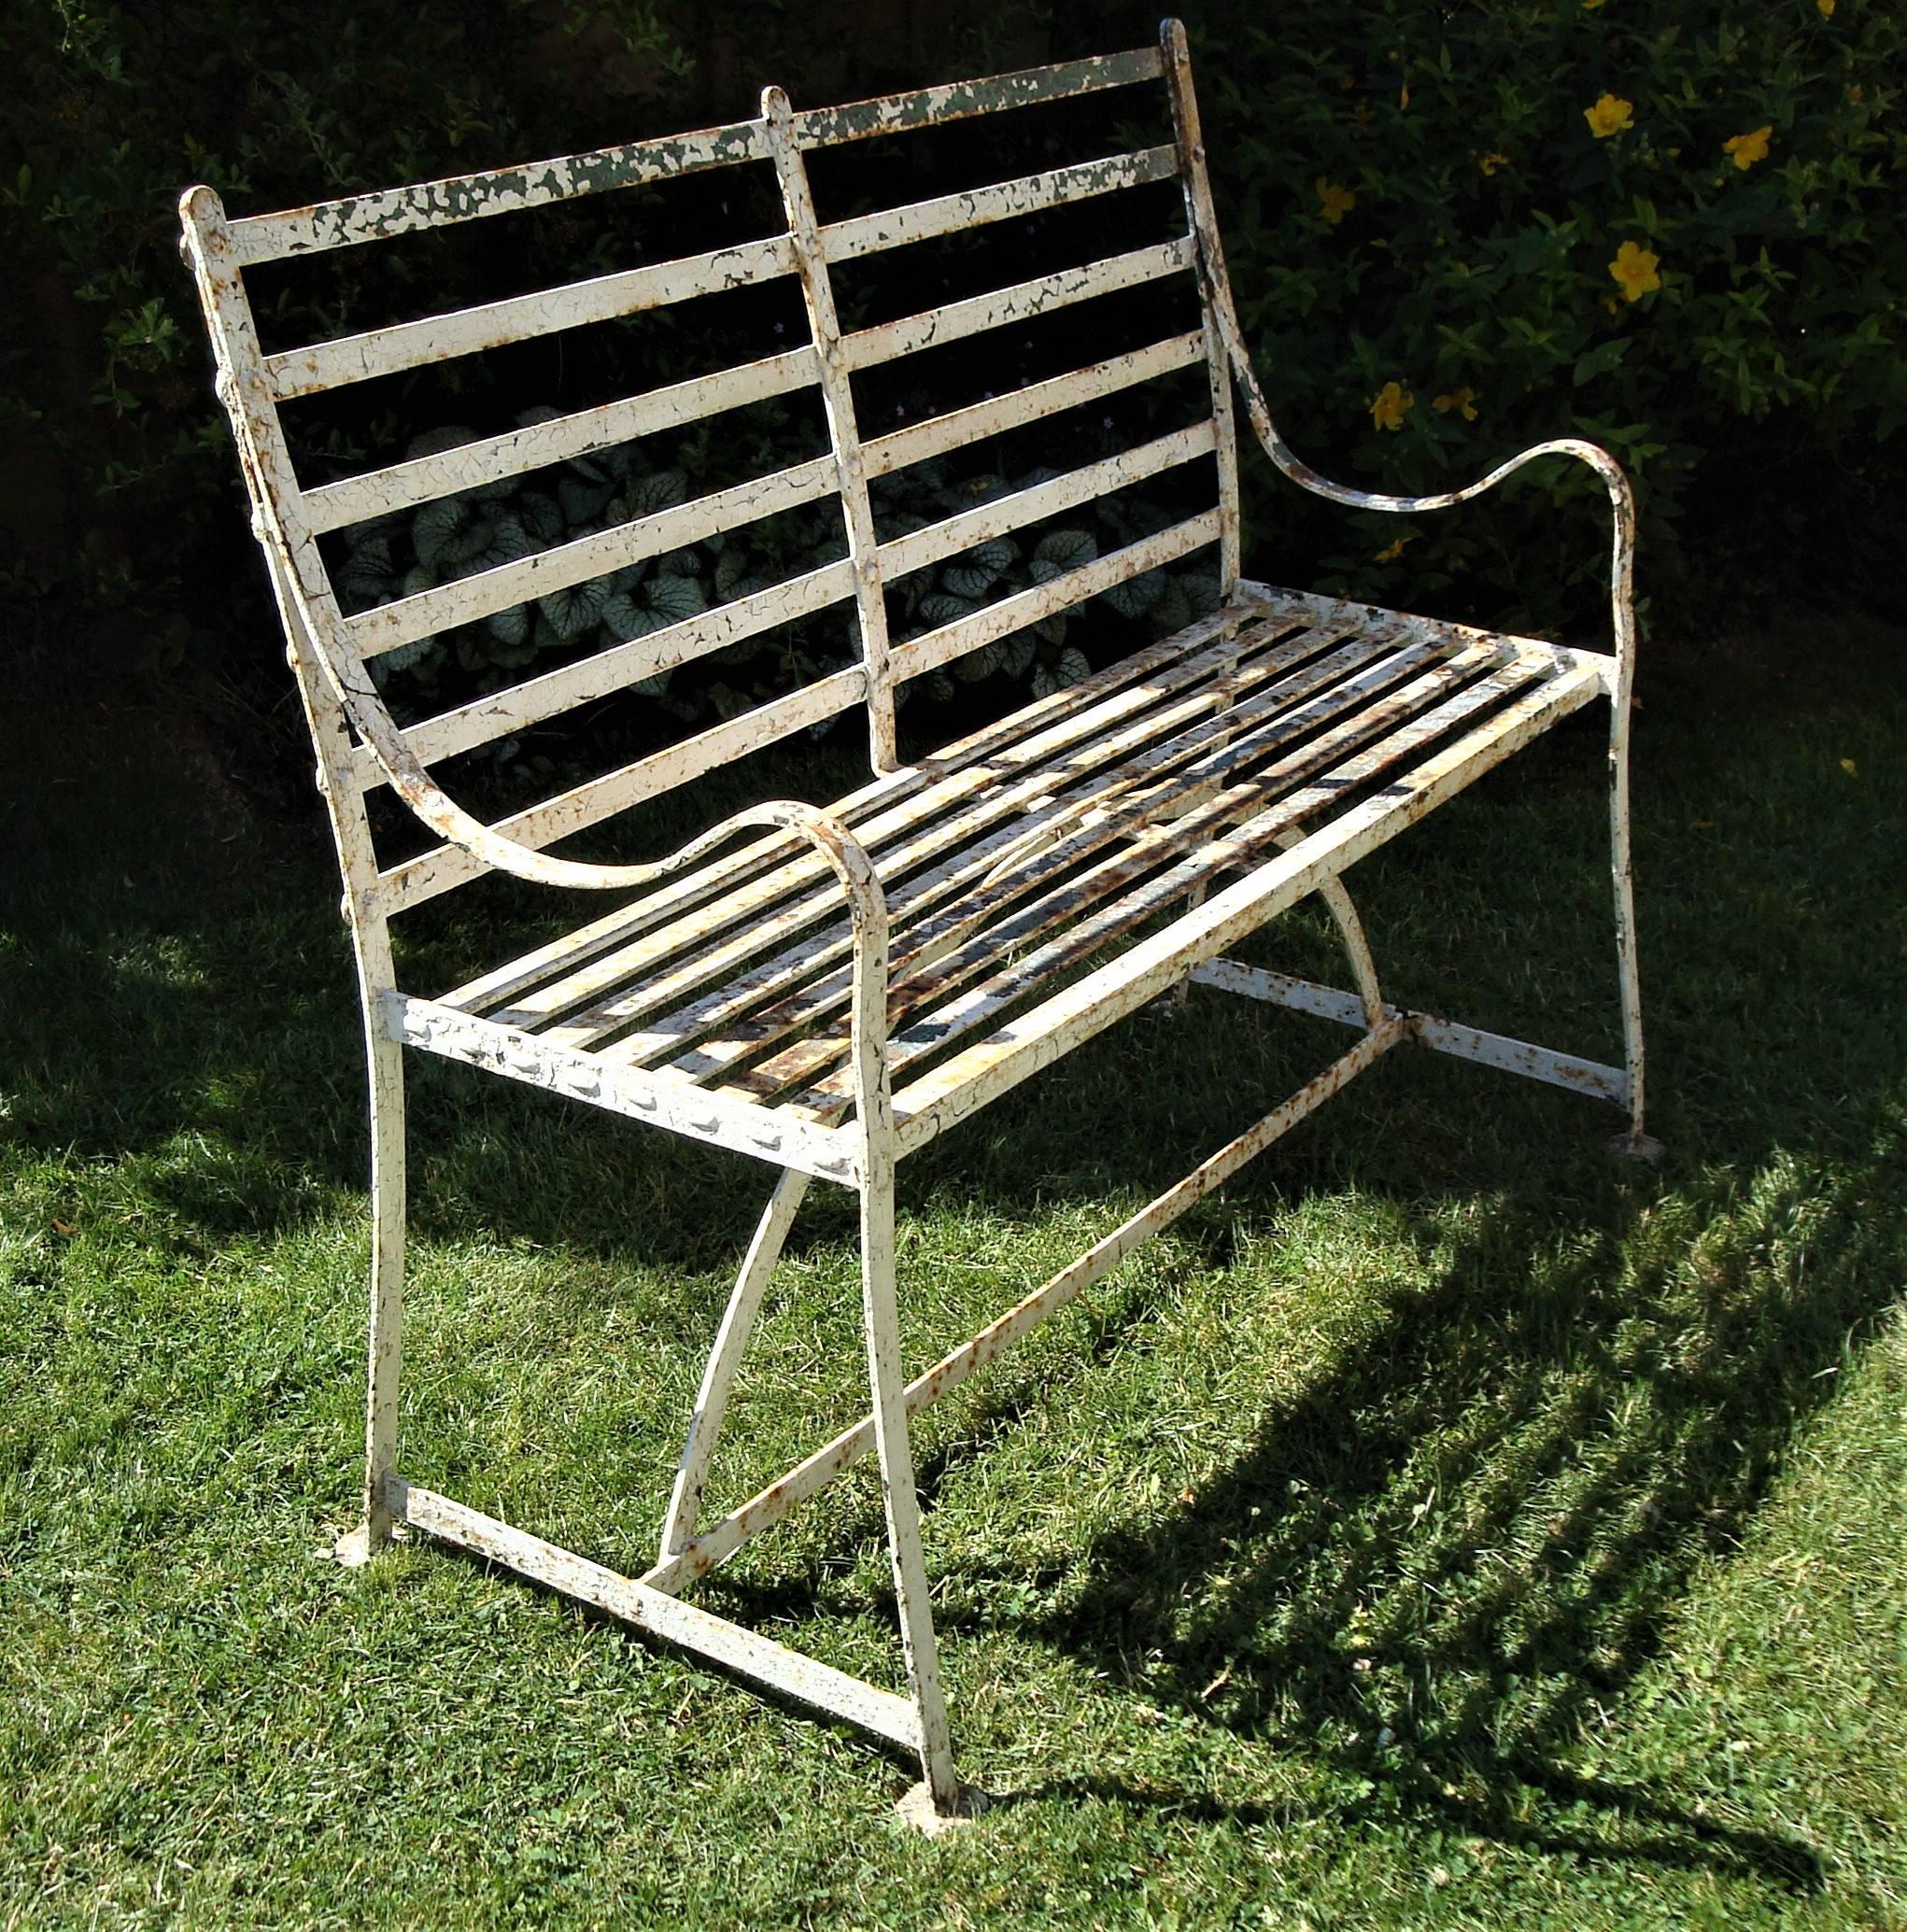 Regency Wrought Iron Garden Seat In Good Condition For Sale In Moreton-in-Marsh, Gloucestershire